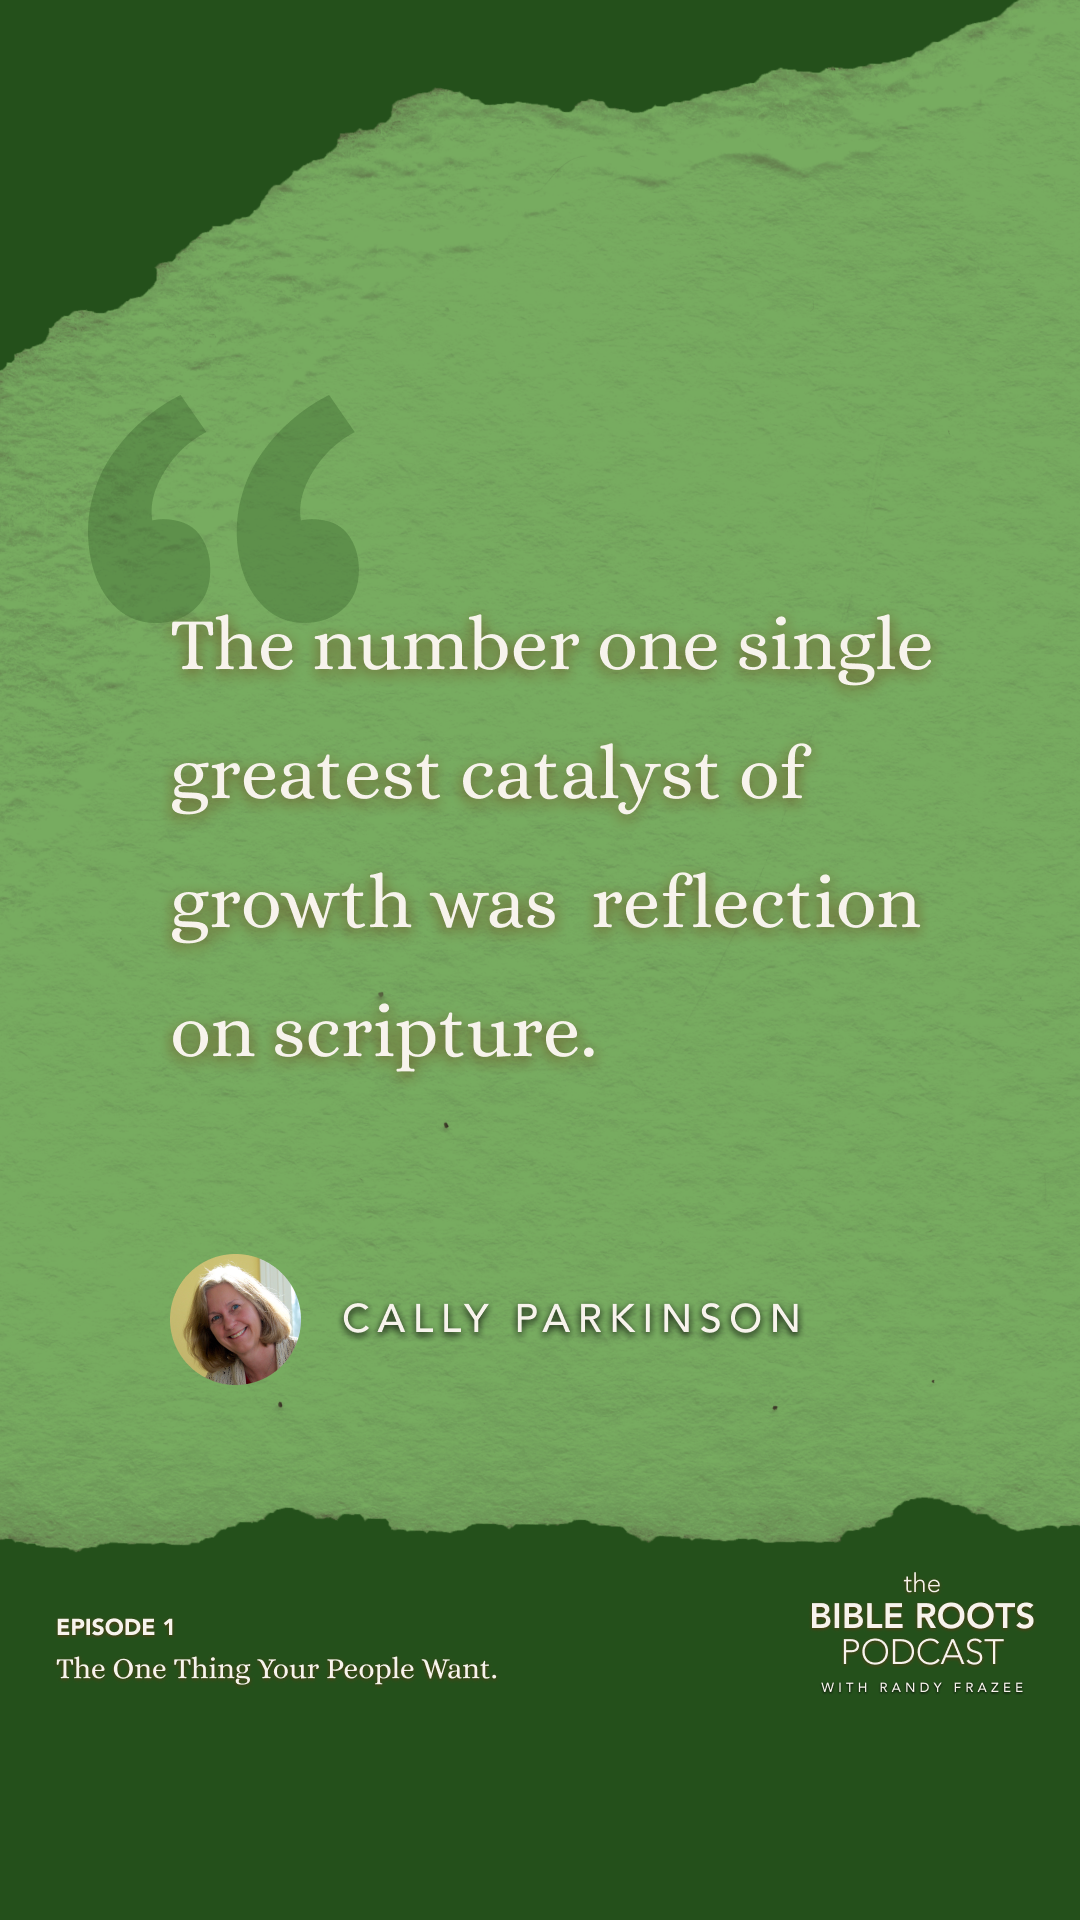 "The number one single greatest catalyst of growth was reflection on scripture"